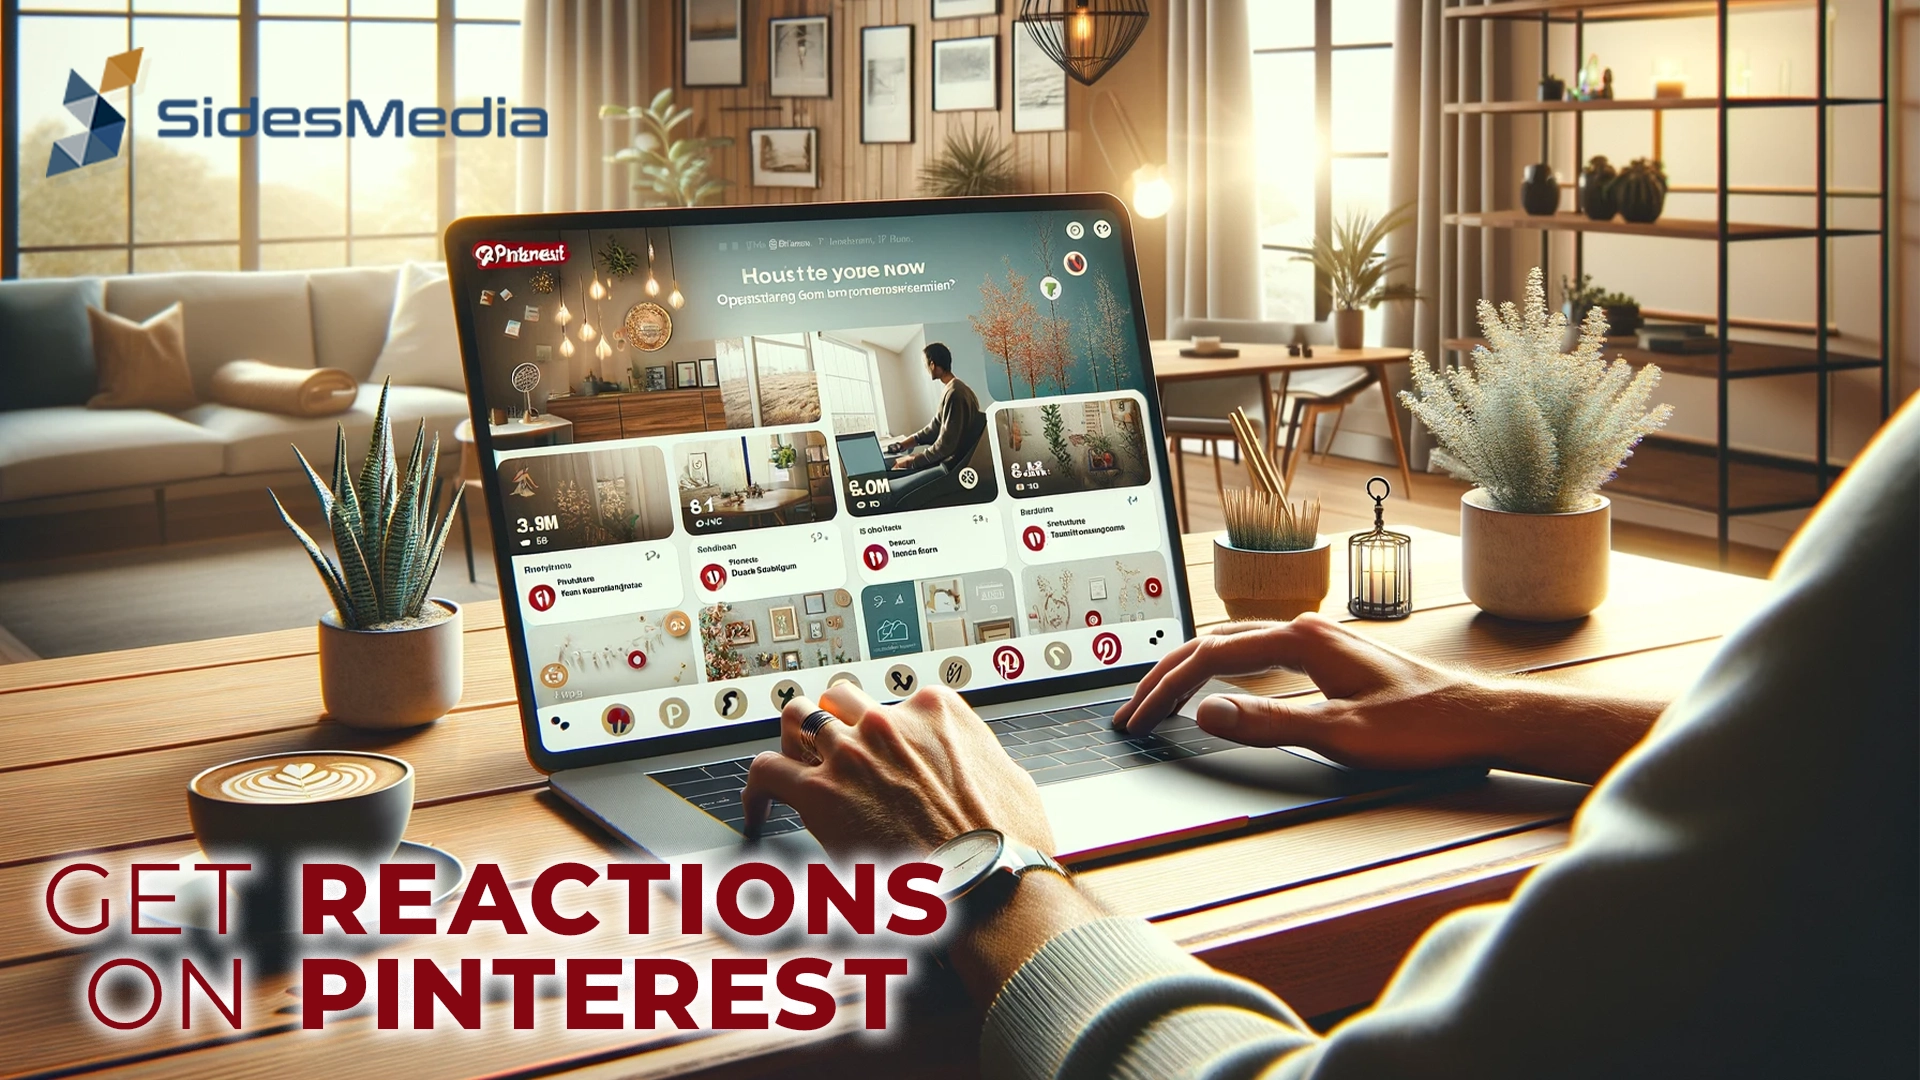 7 Simple Ways to Get More Reactions on Pinterest